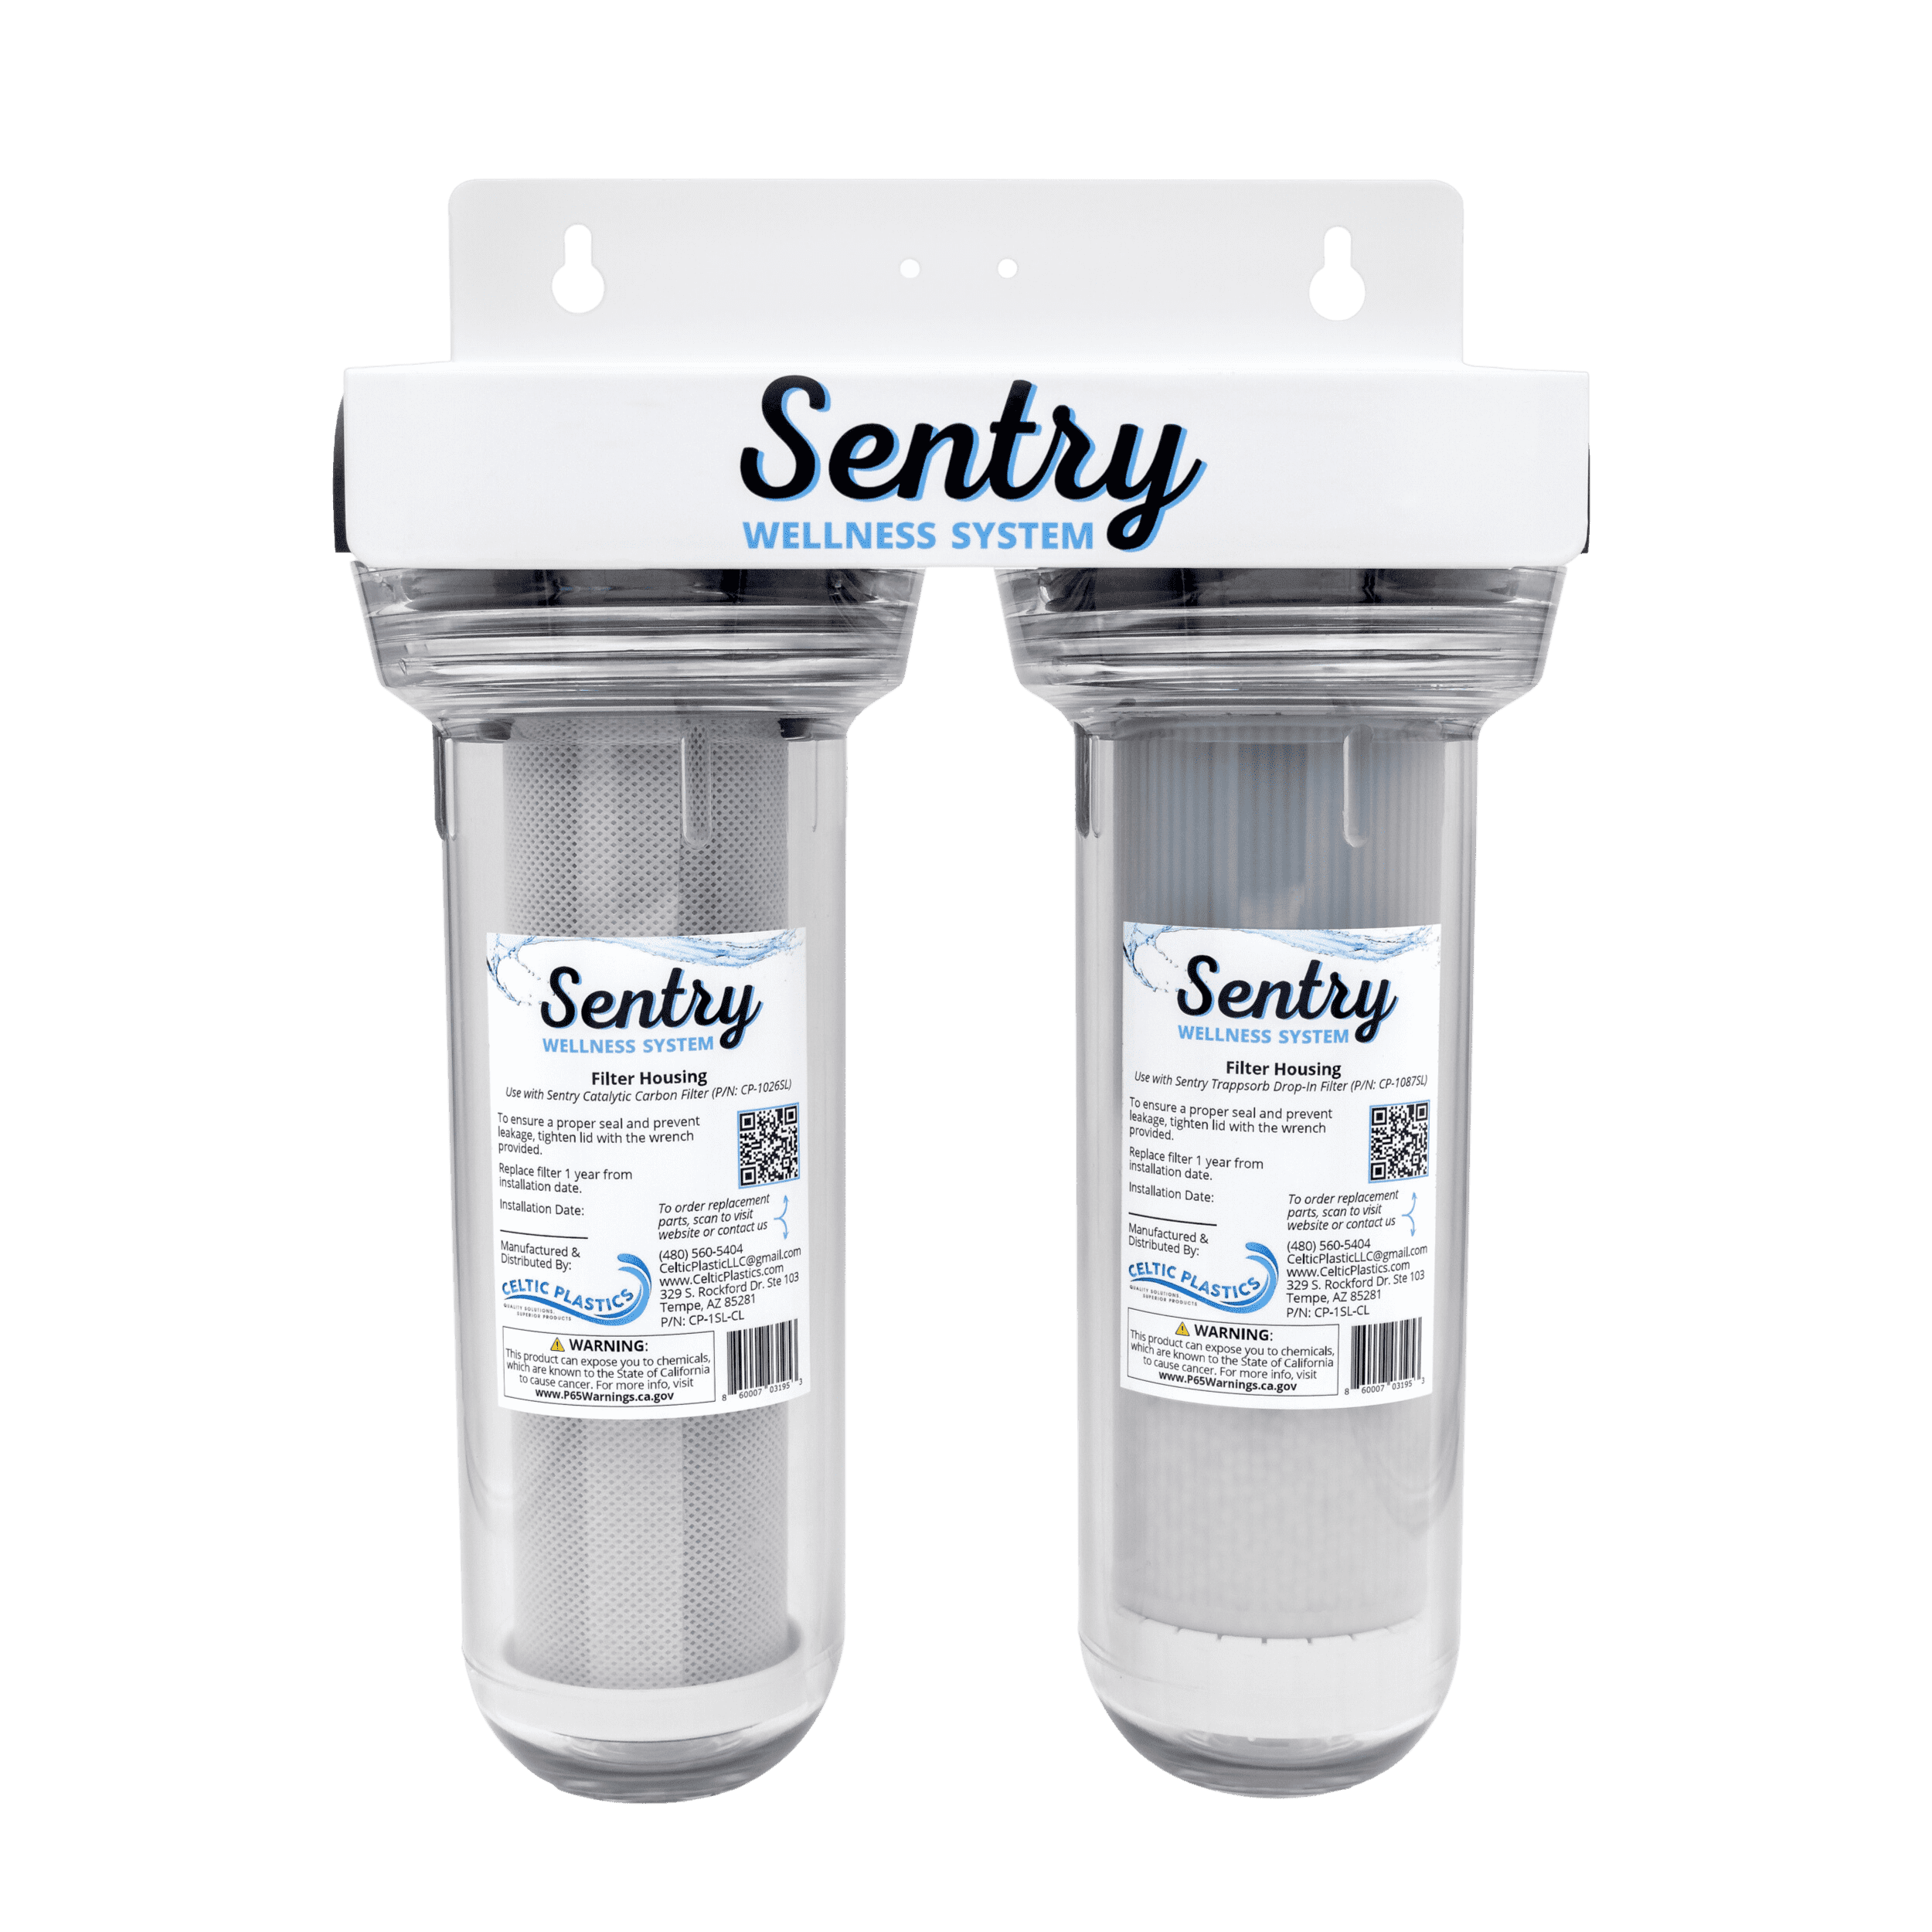 Sentry Wellness System water filters